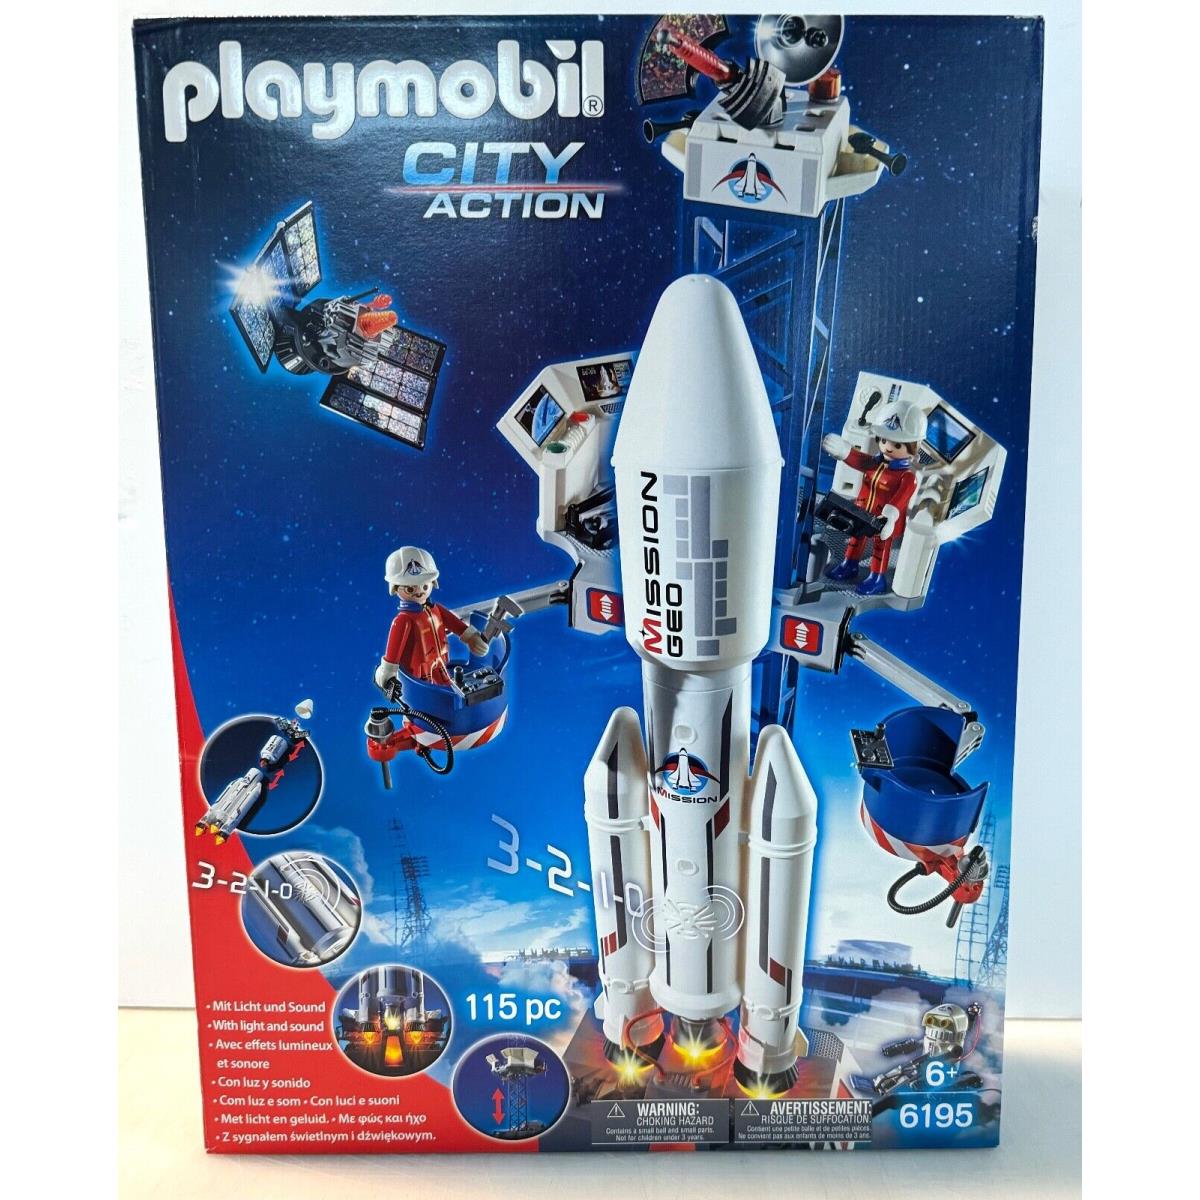 Playmobil City Action 6195 Space Rocket with Launch Site 115 Pcs